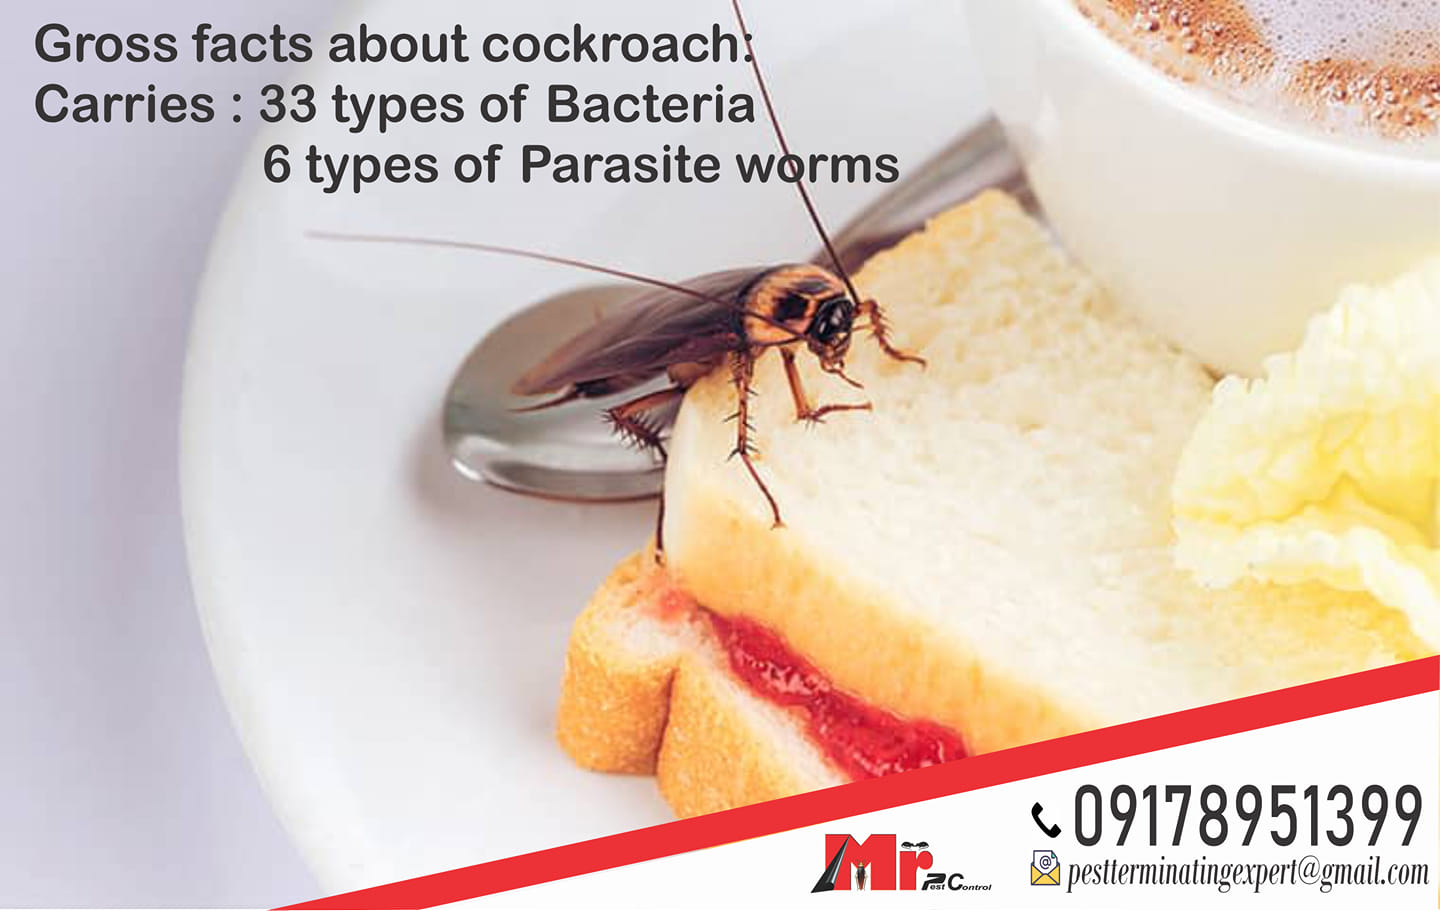 Discover the insidious nature of cockroach infestation in Manila and learn effective solutions with MR Pest Control's expert services for cockroach control in Manila.